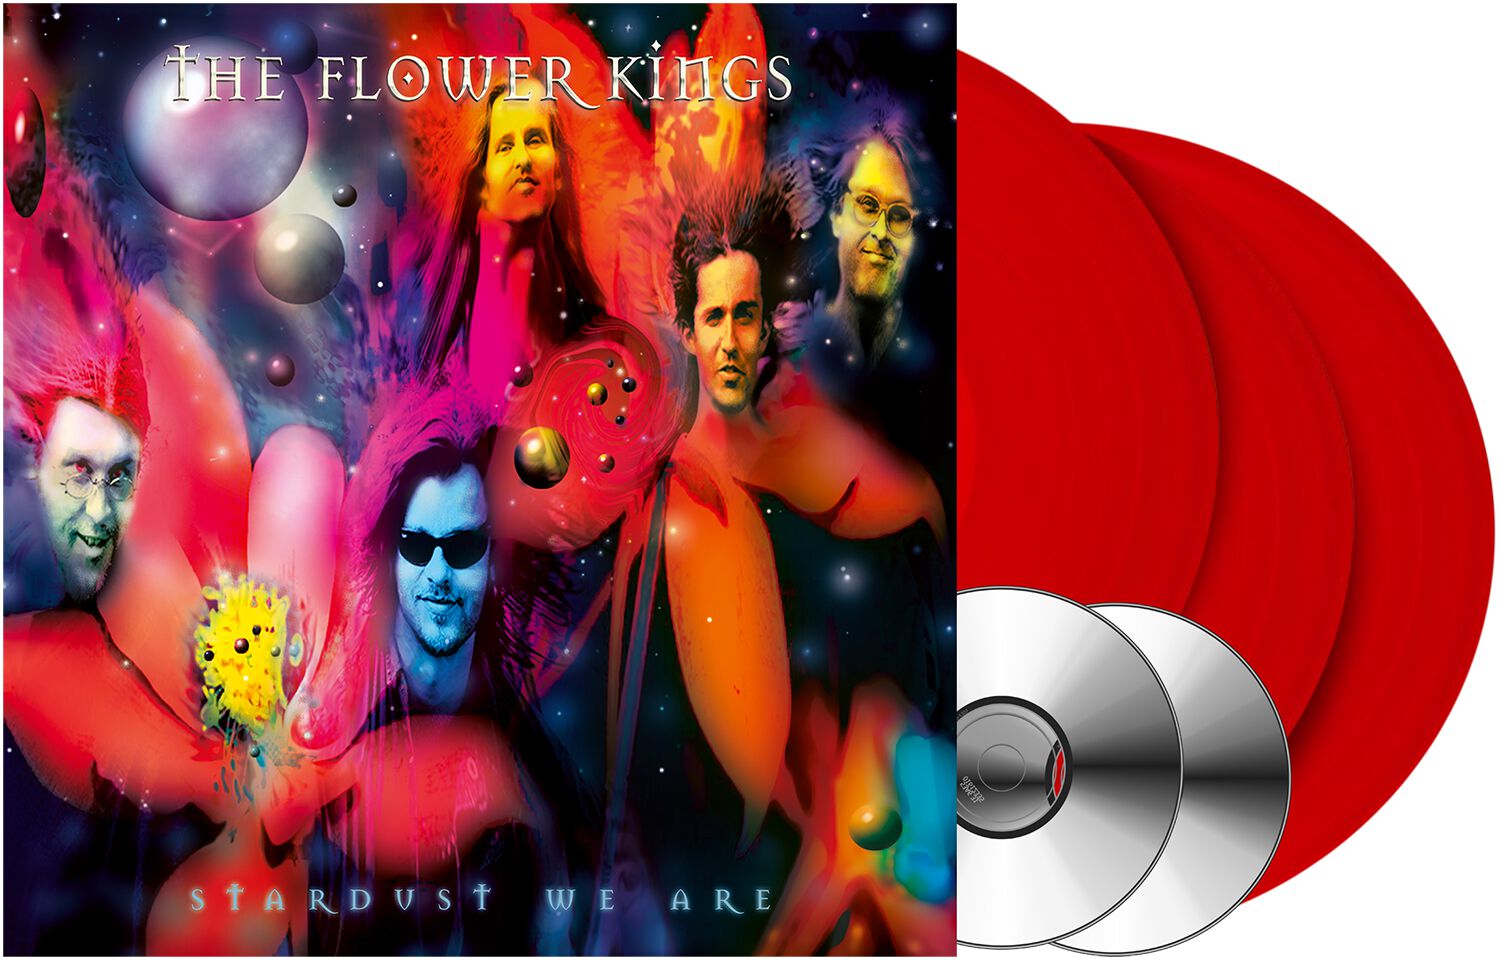 The Flower Kings Stardust we are LP coloured